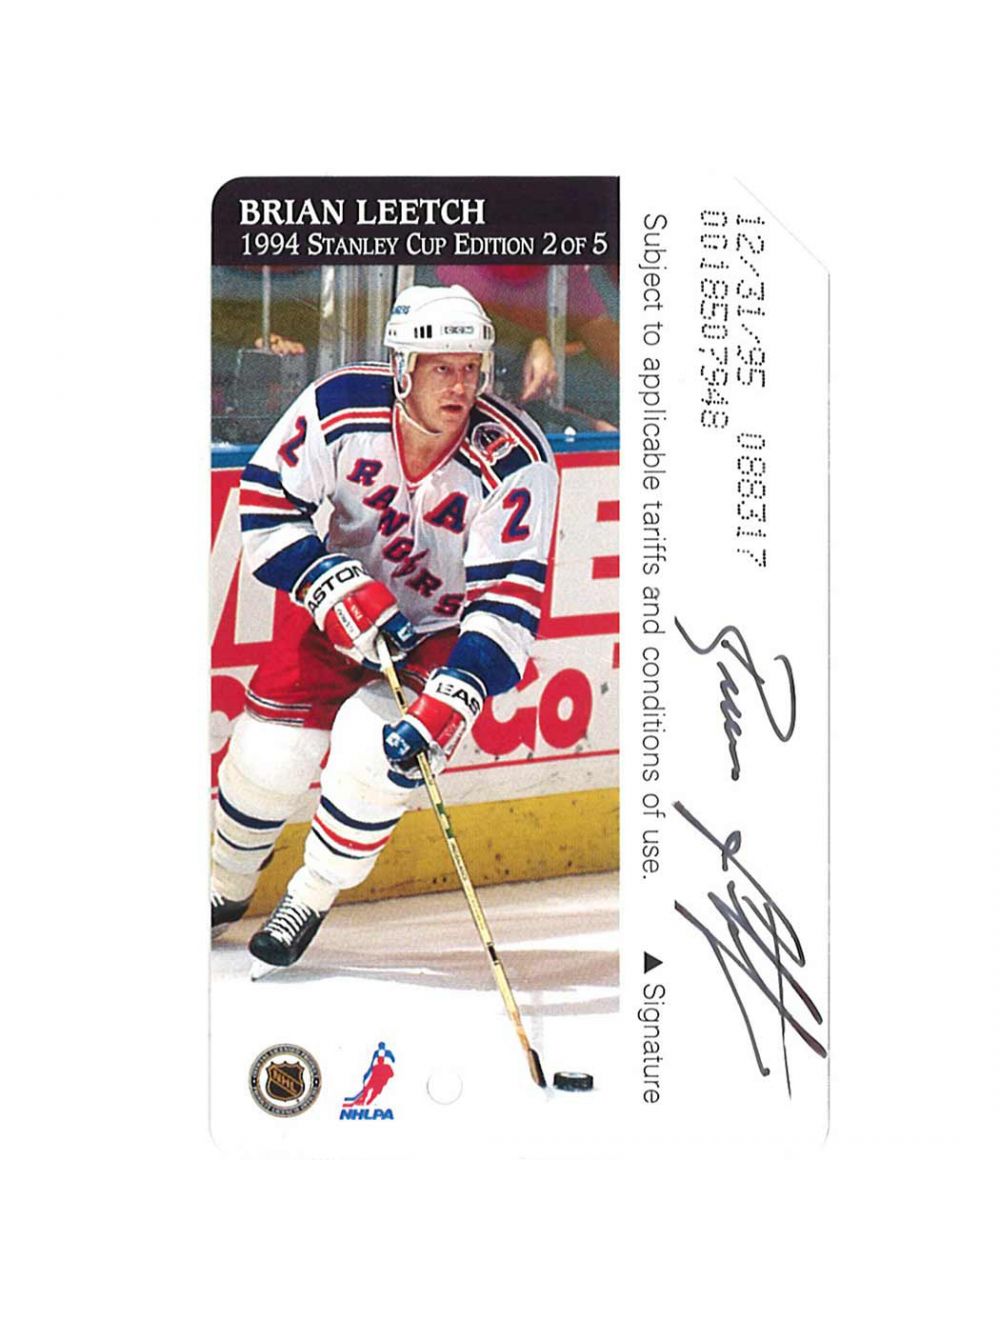 brian leetch signed jersey